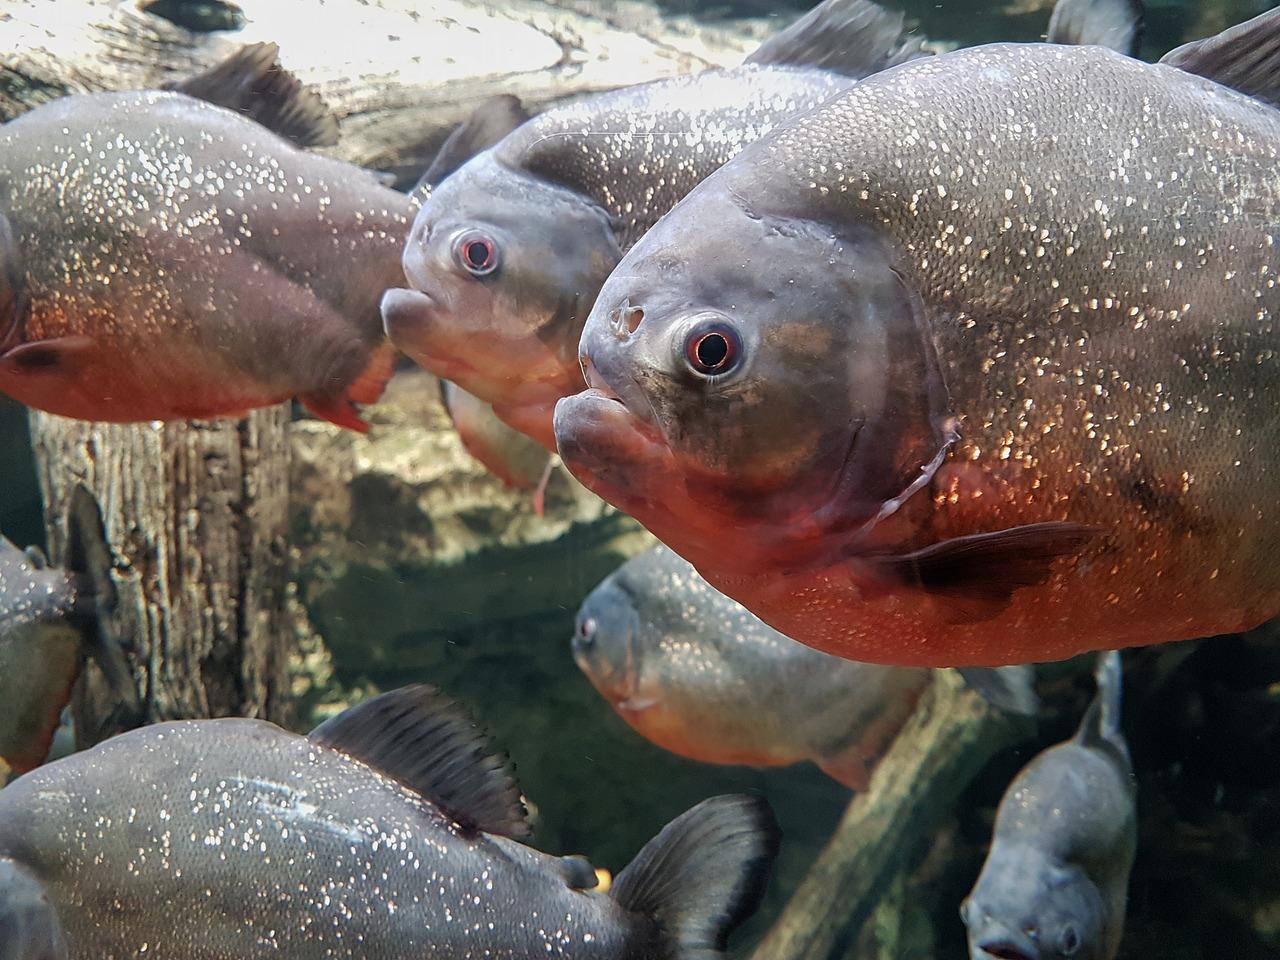 How long does it take piranha to eat a human? 